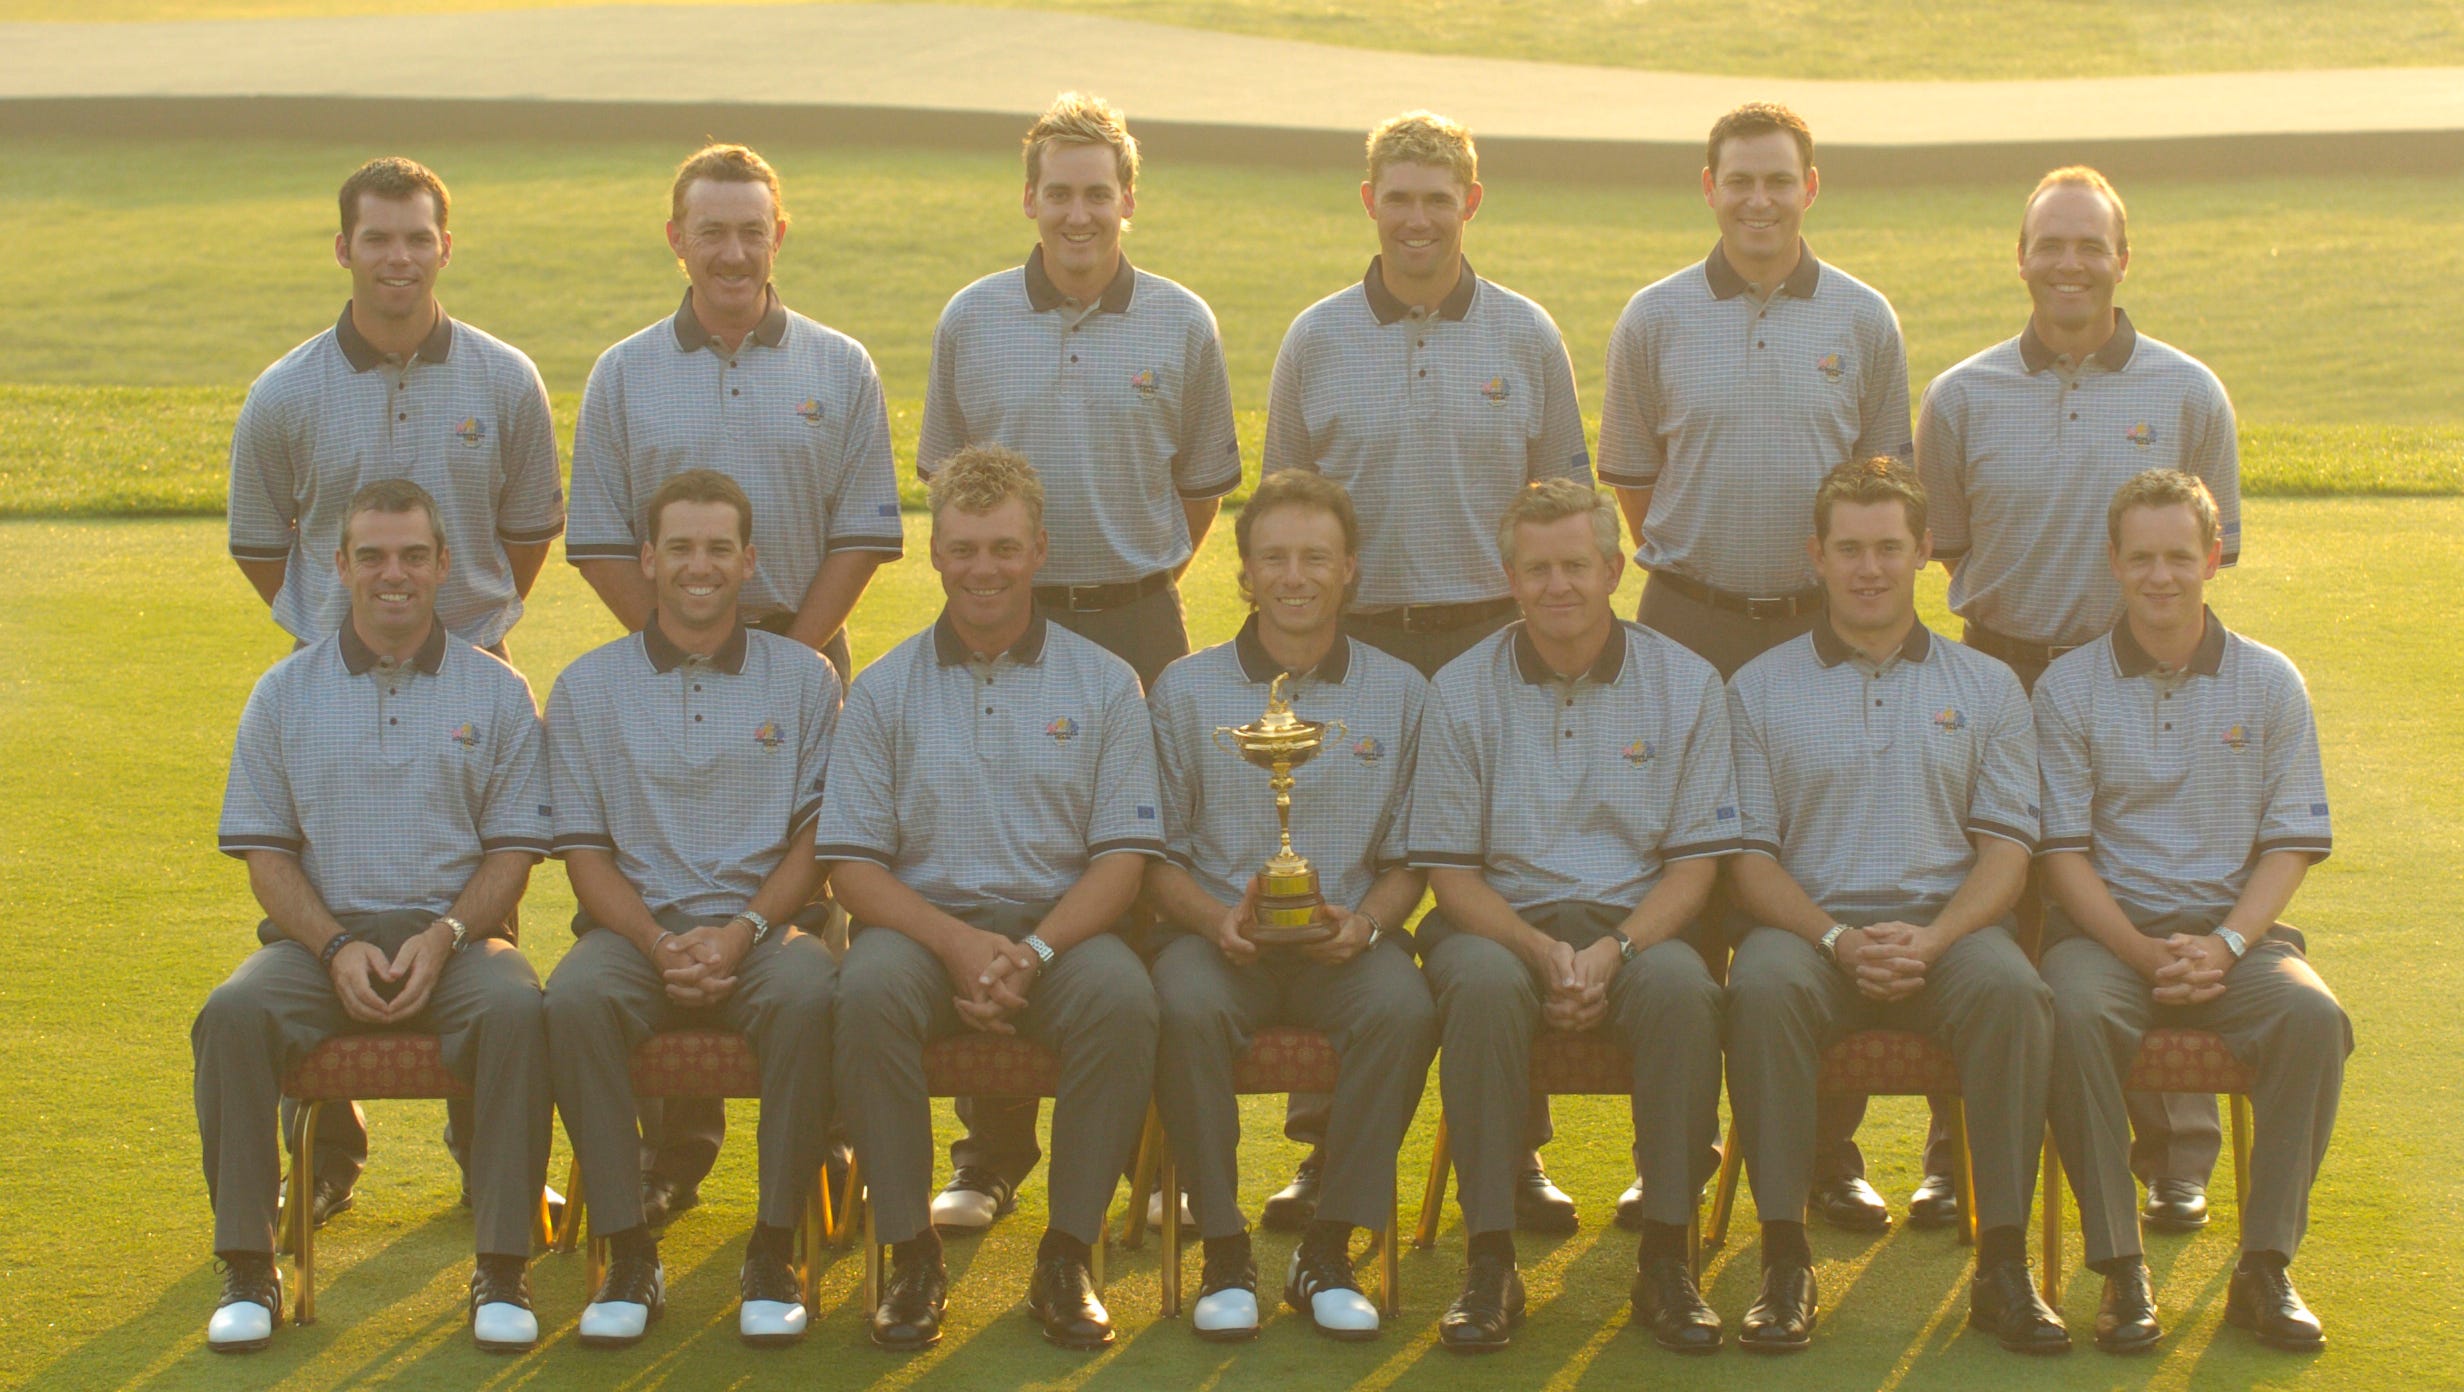 Members of Team Europe pose for their official portrait prior to the 2004 Ryder Cup.